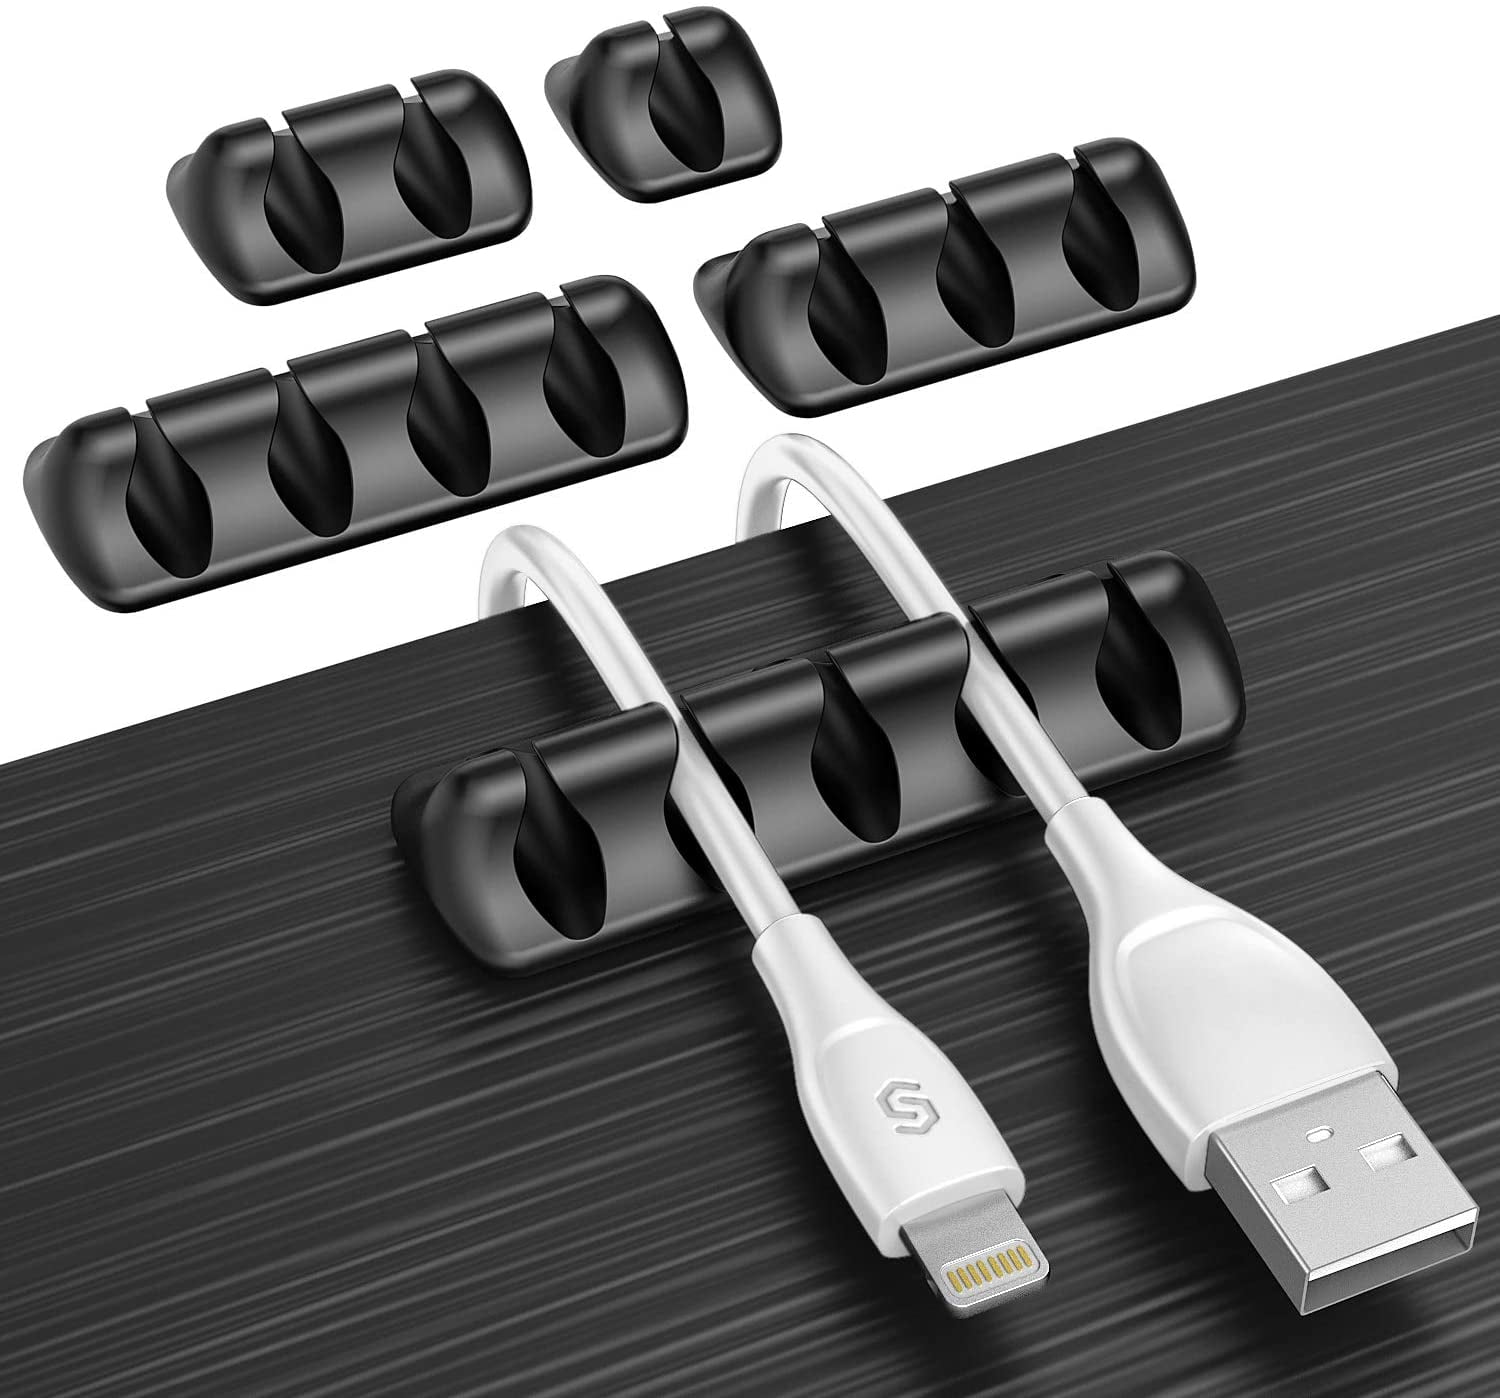 Heldig Cable Clips, Cable Holders Multi-Purpose Cable Management Cable  Organizer Set for Desk, Power Cords, USB Charging Cables, Chargers, Audio